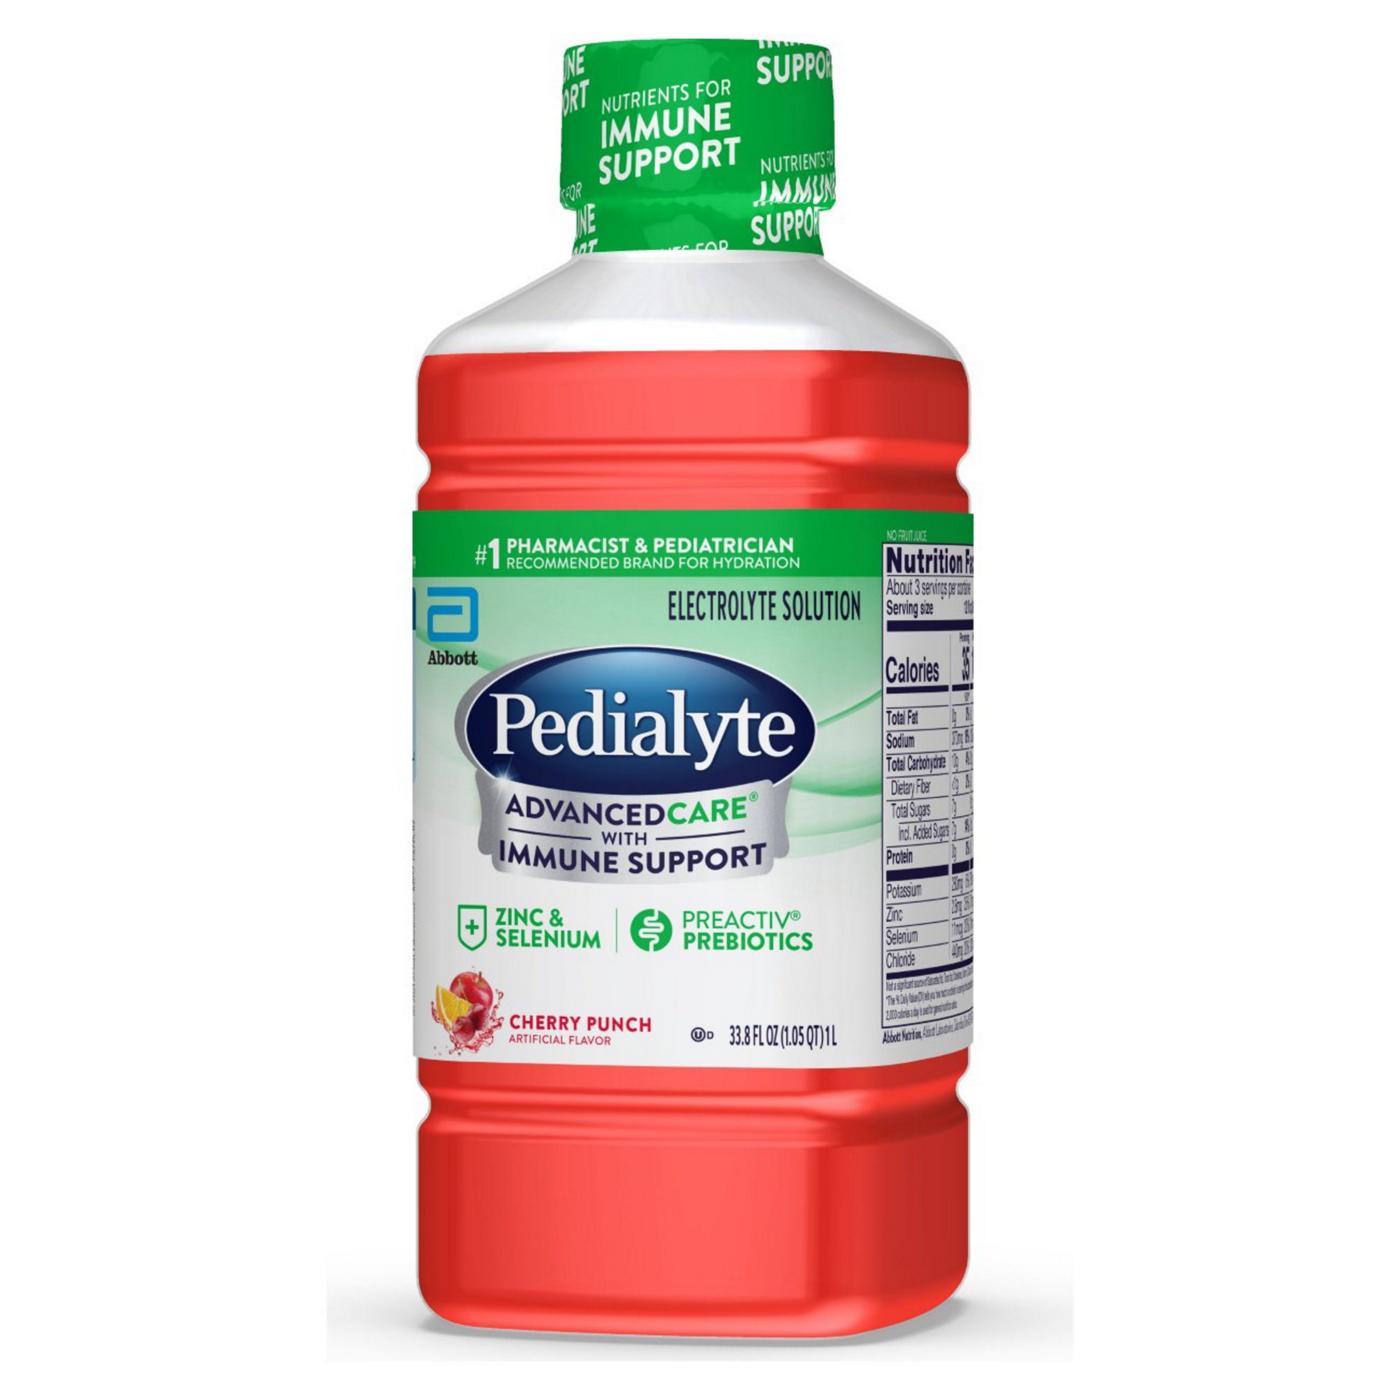 Pedialyte AdvancedCare Electrolyte Solution - Cherry Punch; image 5 of 7